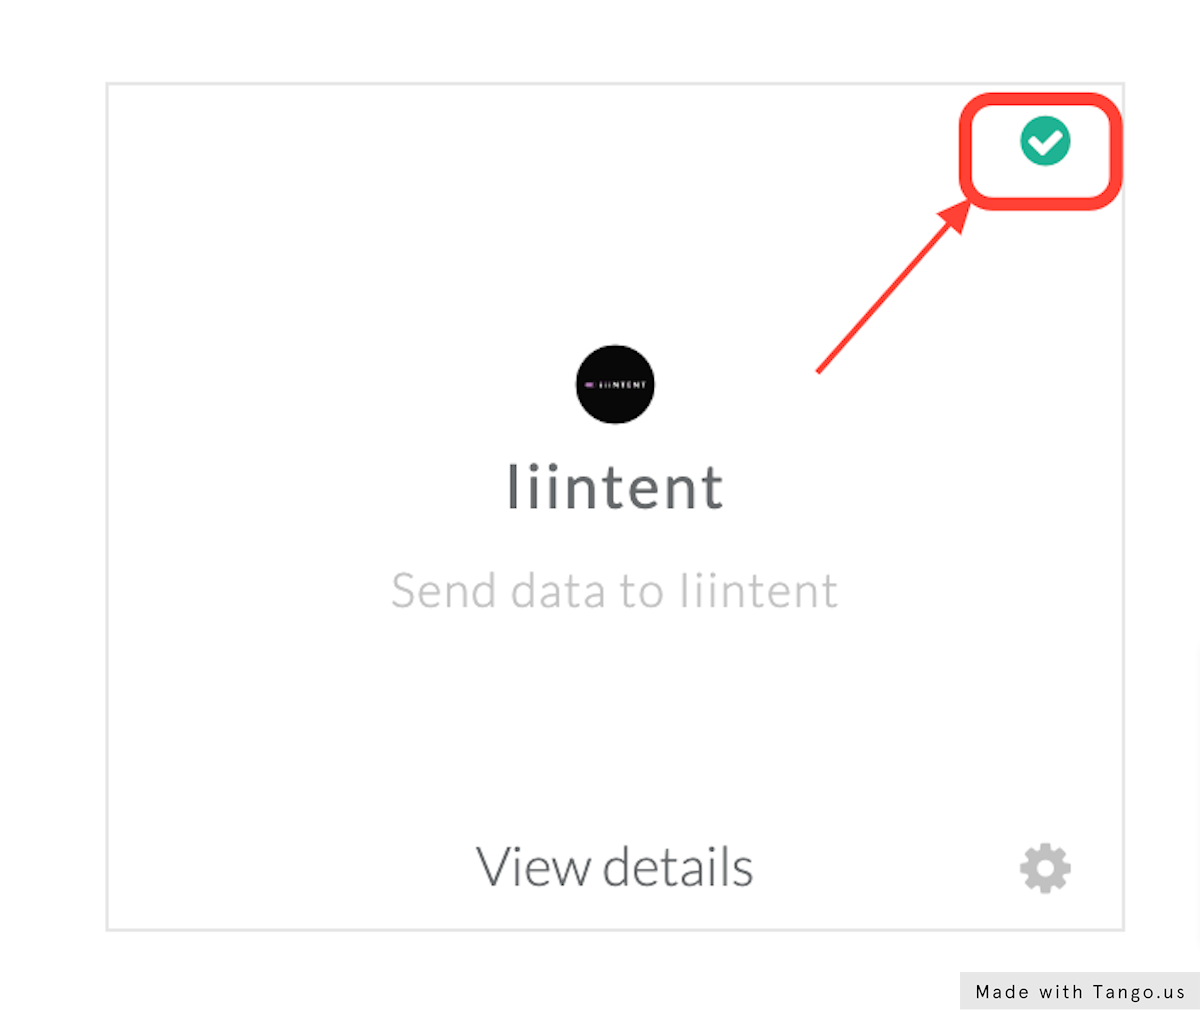 You have now integrated iiintent.io with CustomerLabs CDP